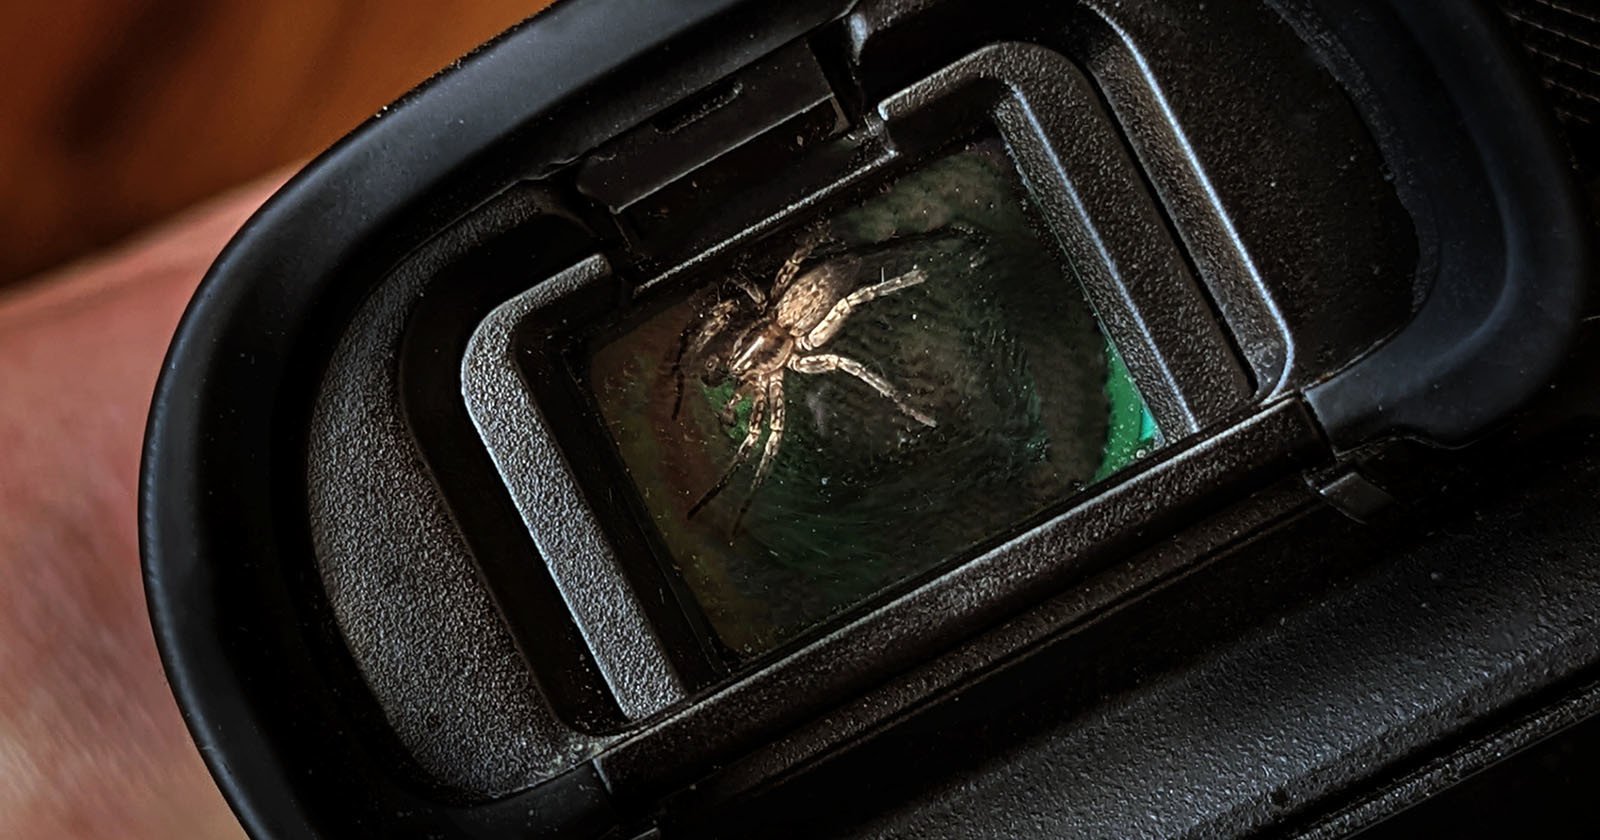  photographer finds spider living his camera viewfinder 